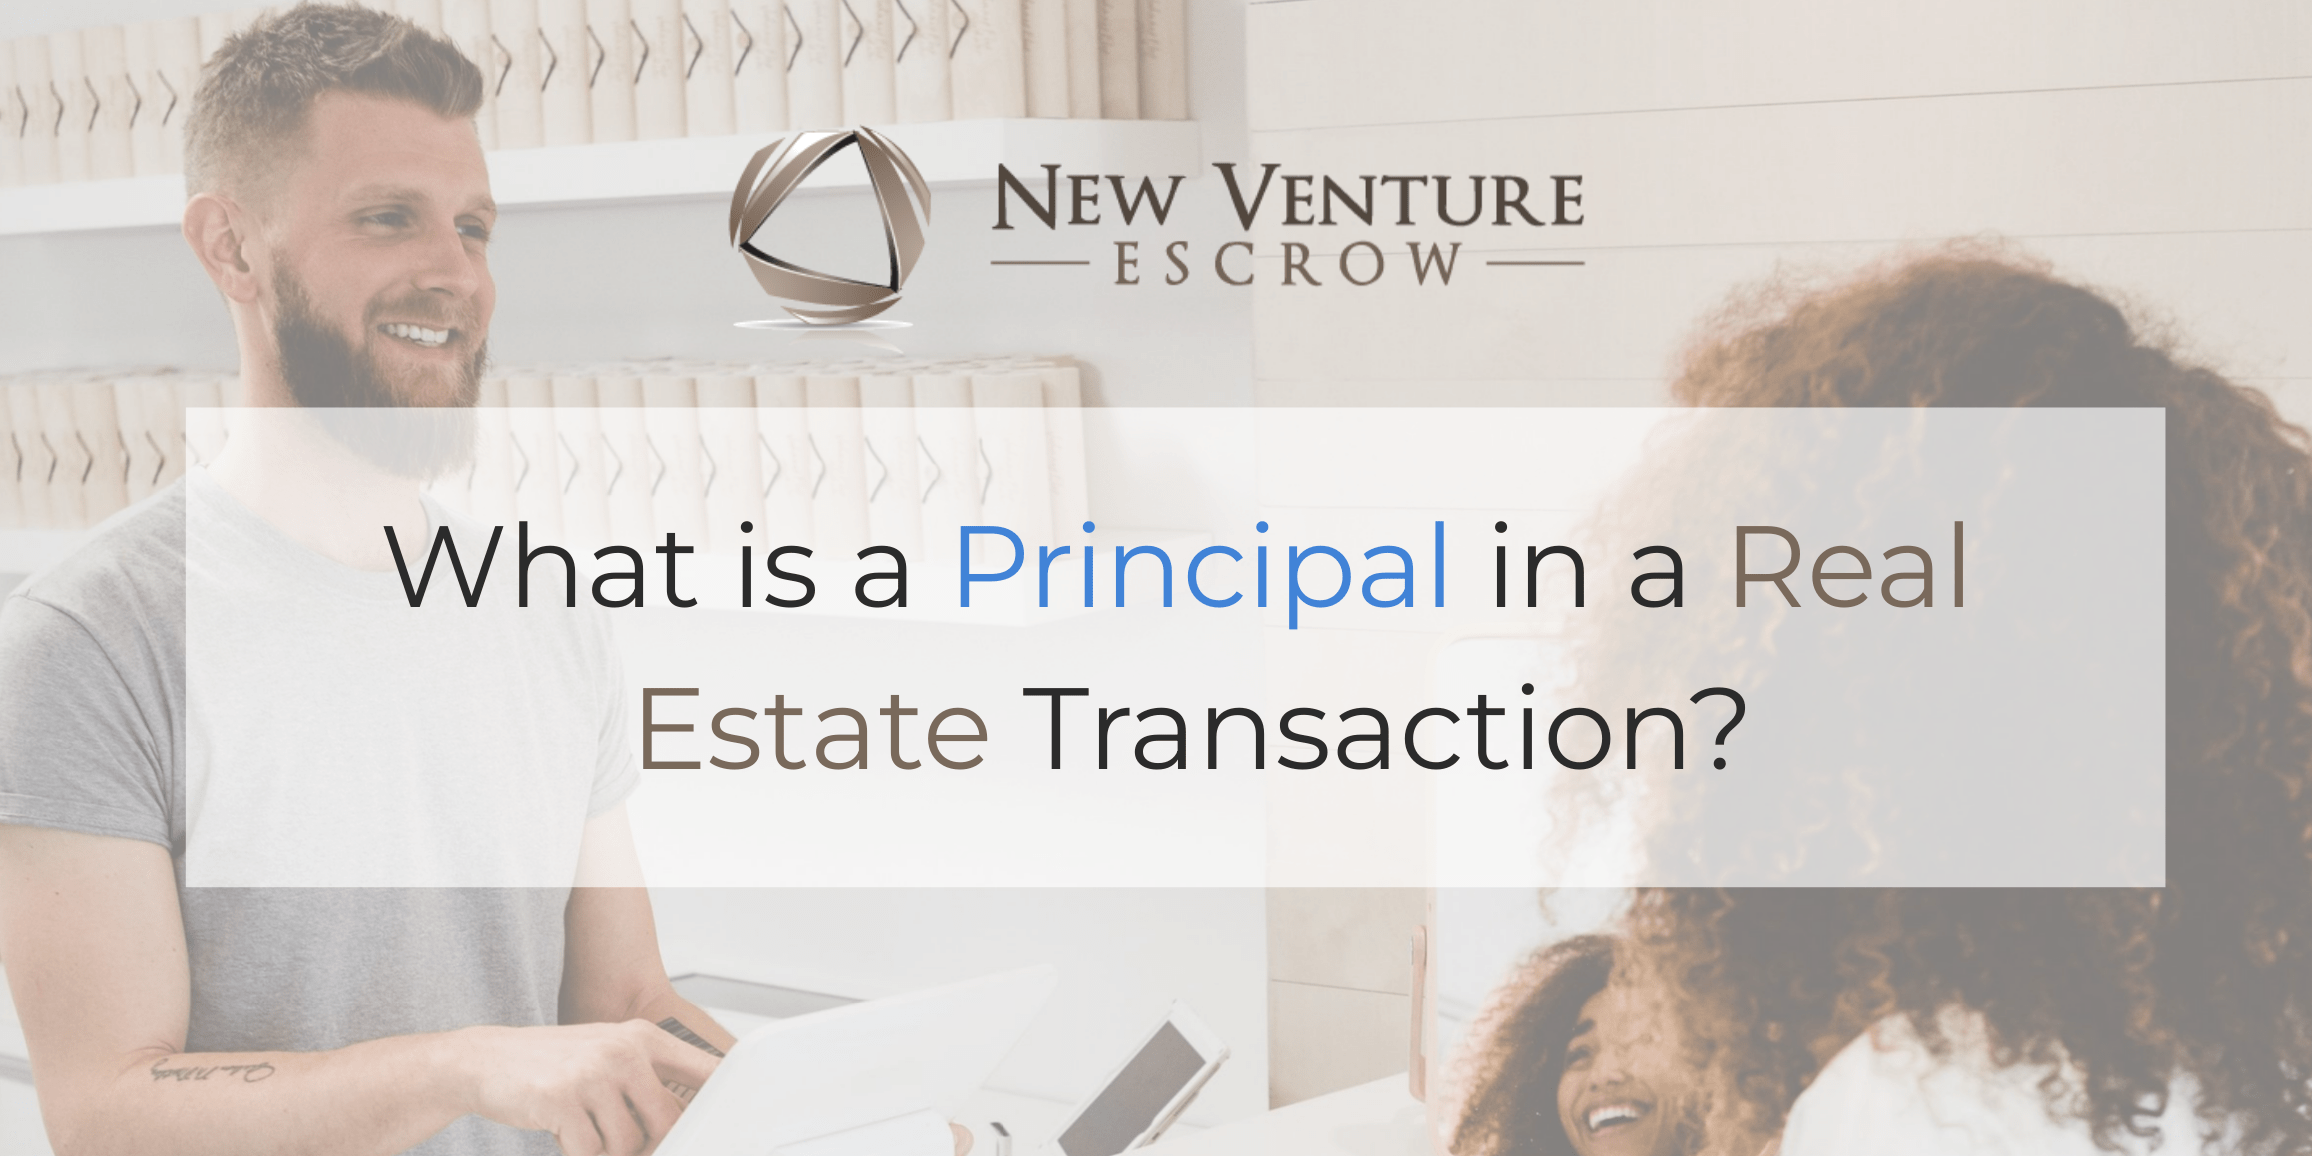 Who is a principal in real estate